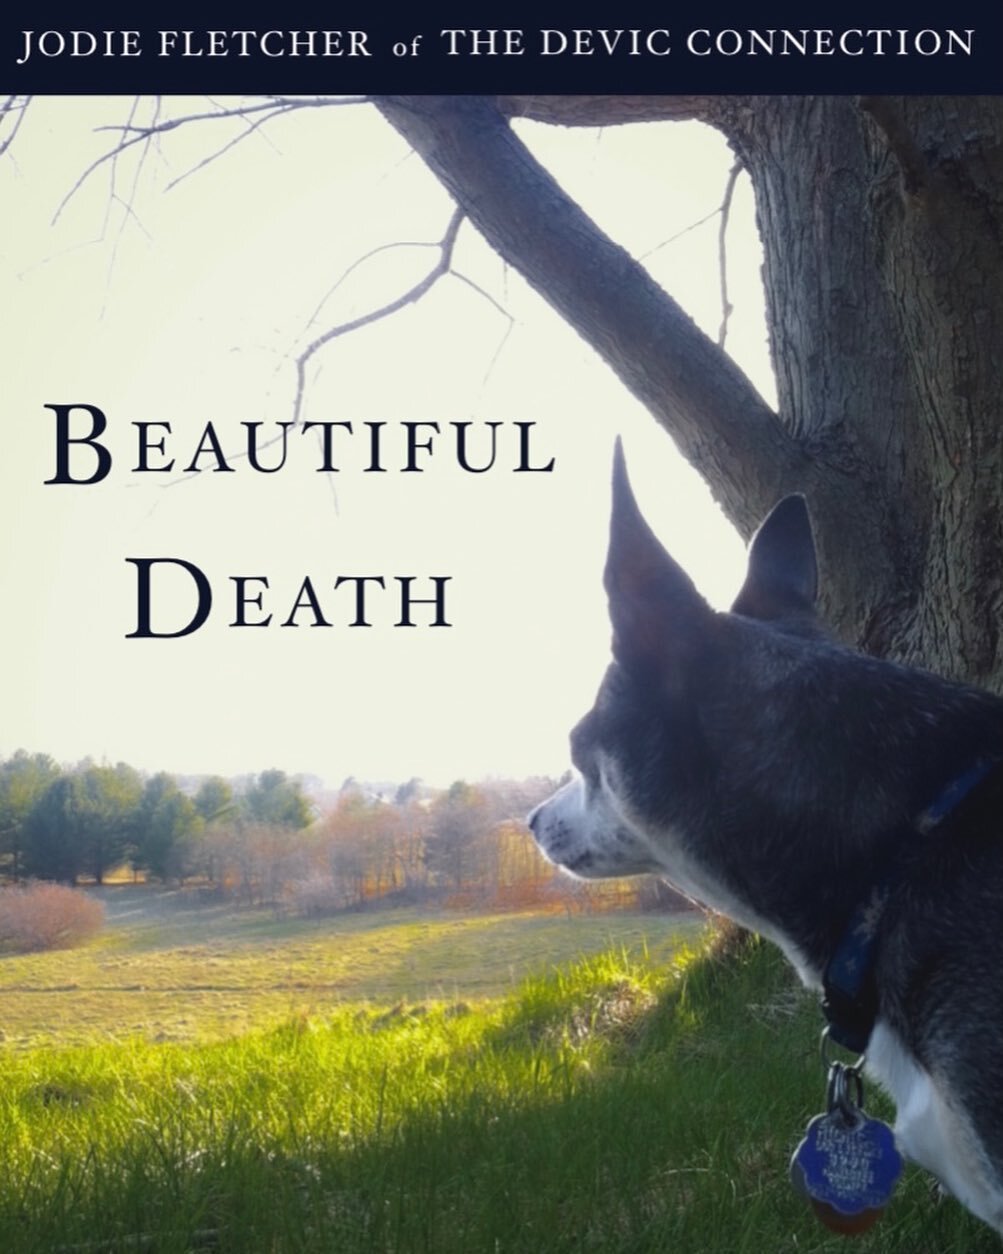 Hello Friends! After oh-so-much fussing, the cover for my next book, Beautiful Death, is finally ready to be seen! The book itself is almost ready, too, so I will be sure to let you know when it&rsquo;s available. The subtitle, which is at the bottom